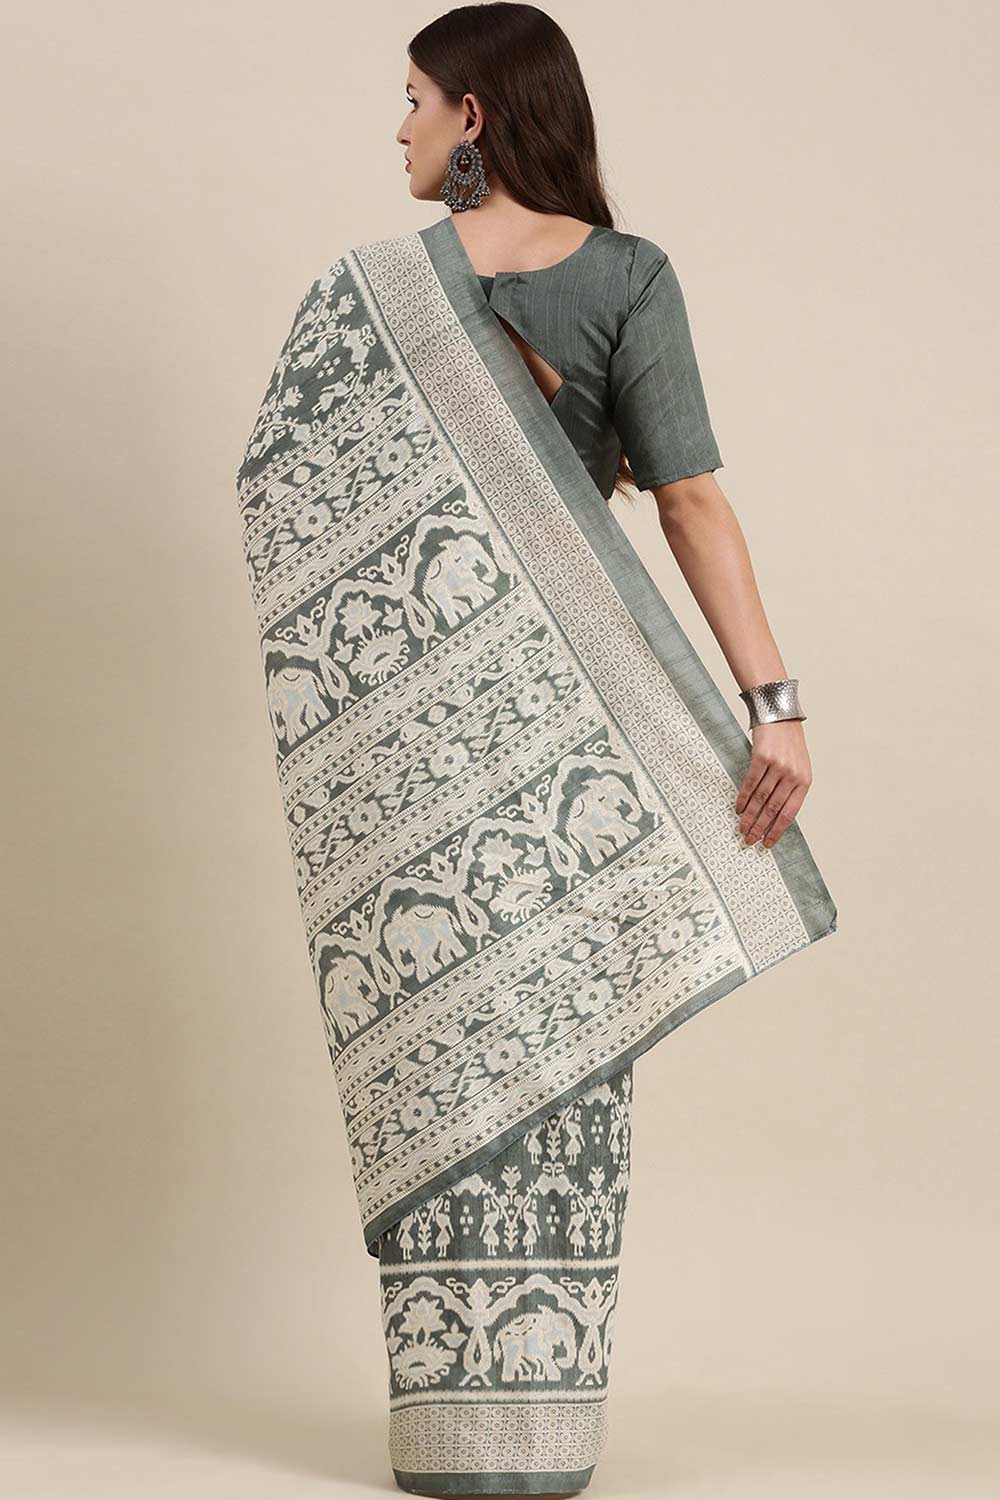 Shop Hema Bhagalpuri Silk Grey Printed Celebrity One Minute Saree at best offer at our  Store - One Minute Saree